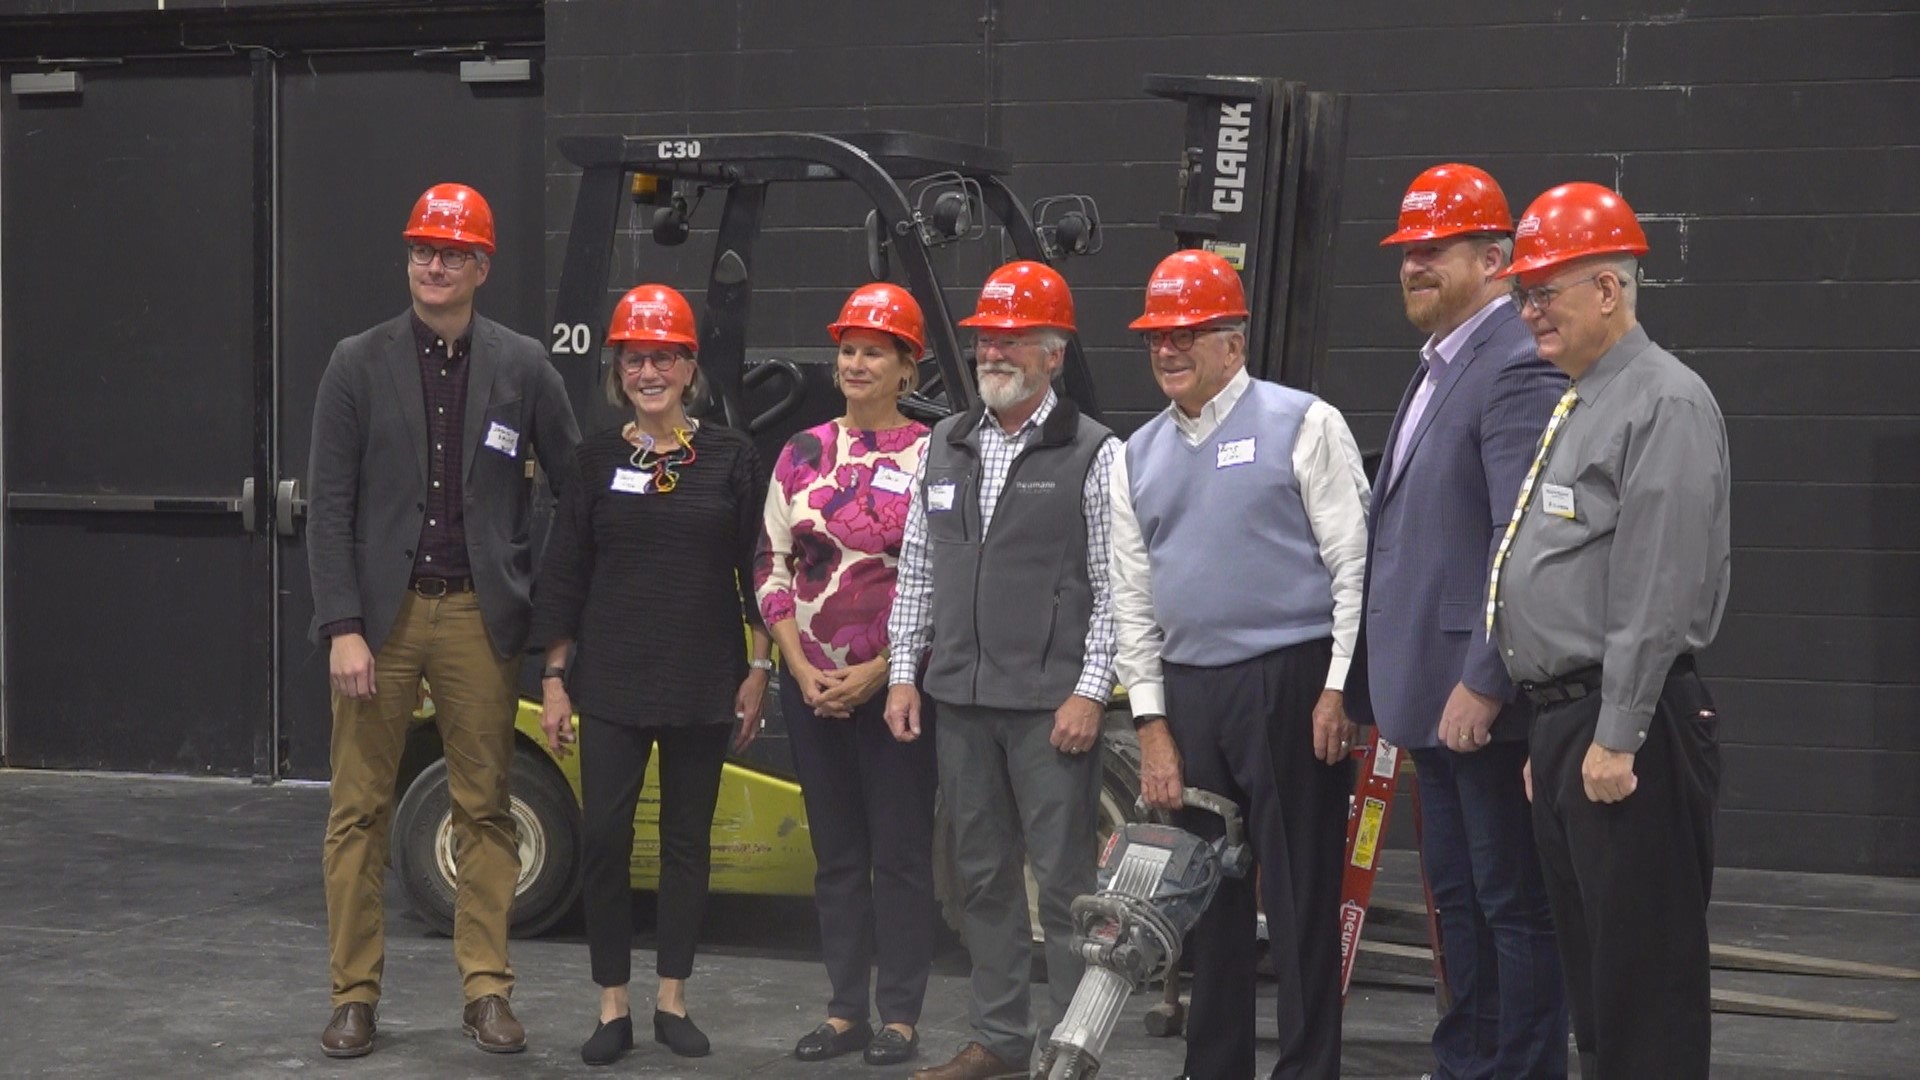 On Monday, the Des Moines Community Playhouse officially kicked off its renovation project of the Kate Goldman Children's Theatre.